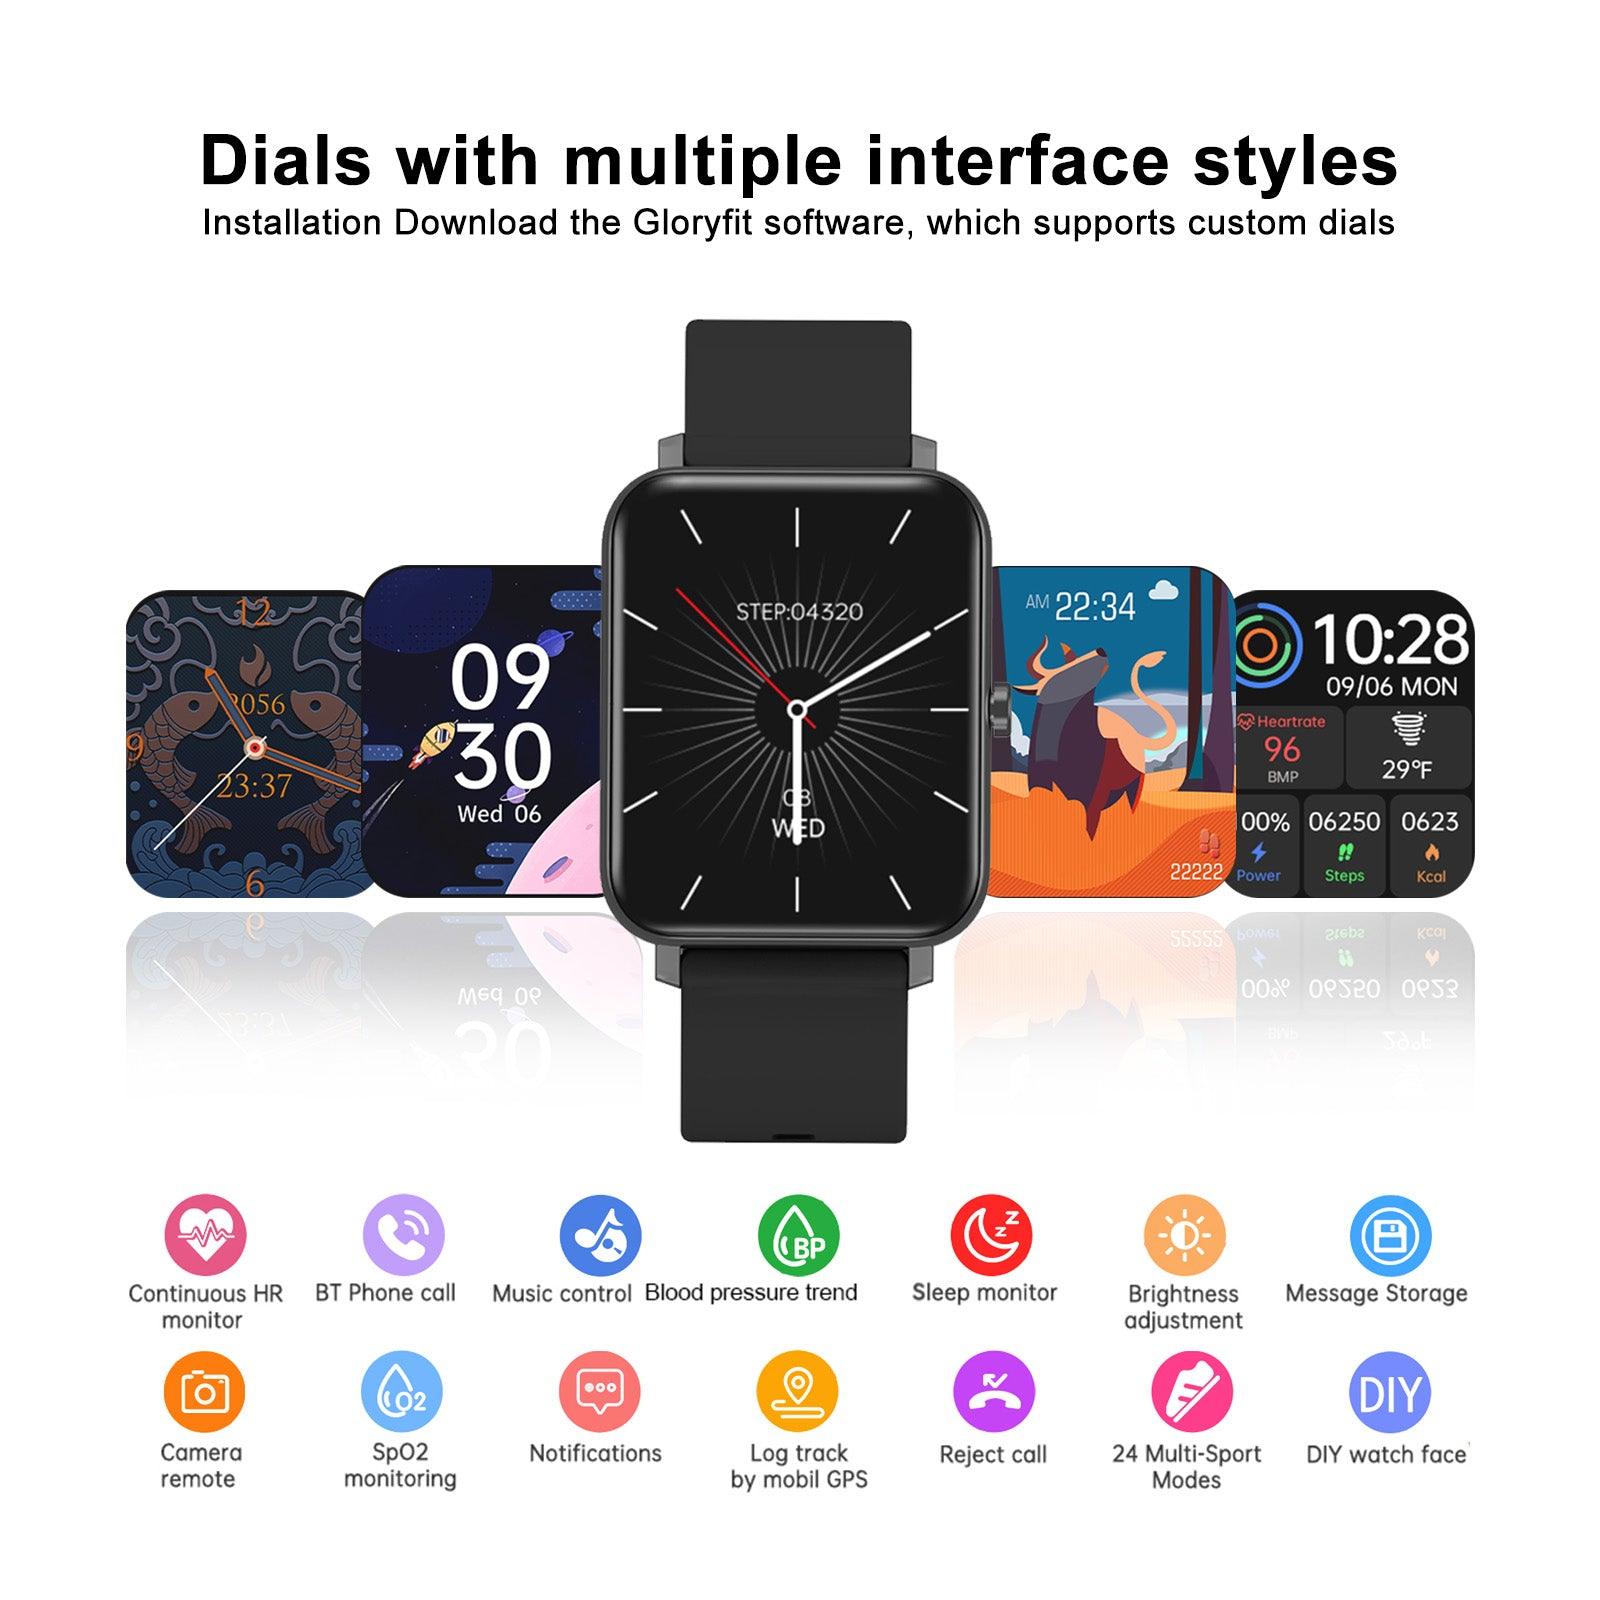 Mione MiW05 Smart Watch 1.69 Inch Touch Screen - Mione